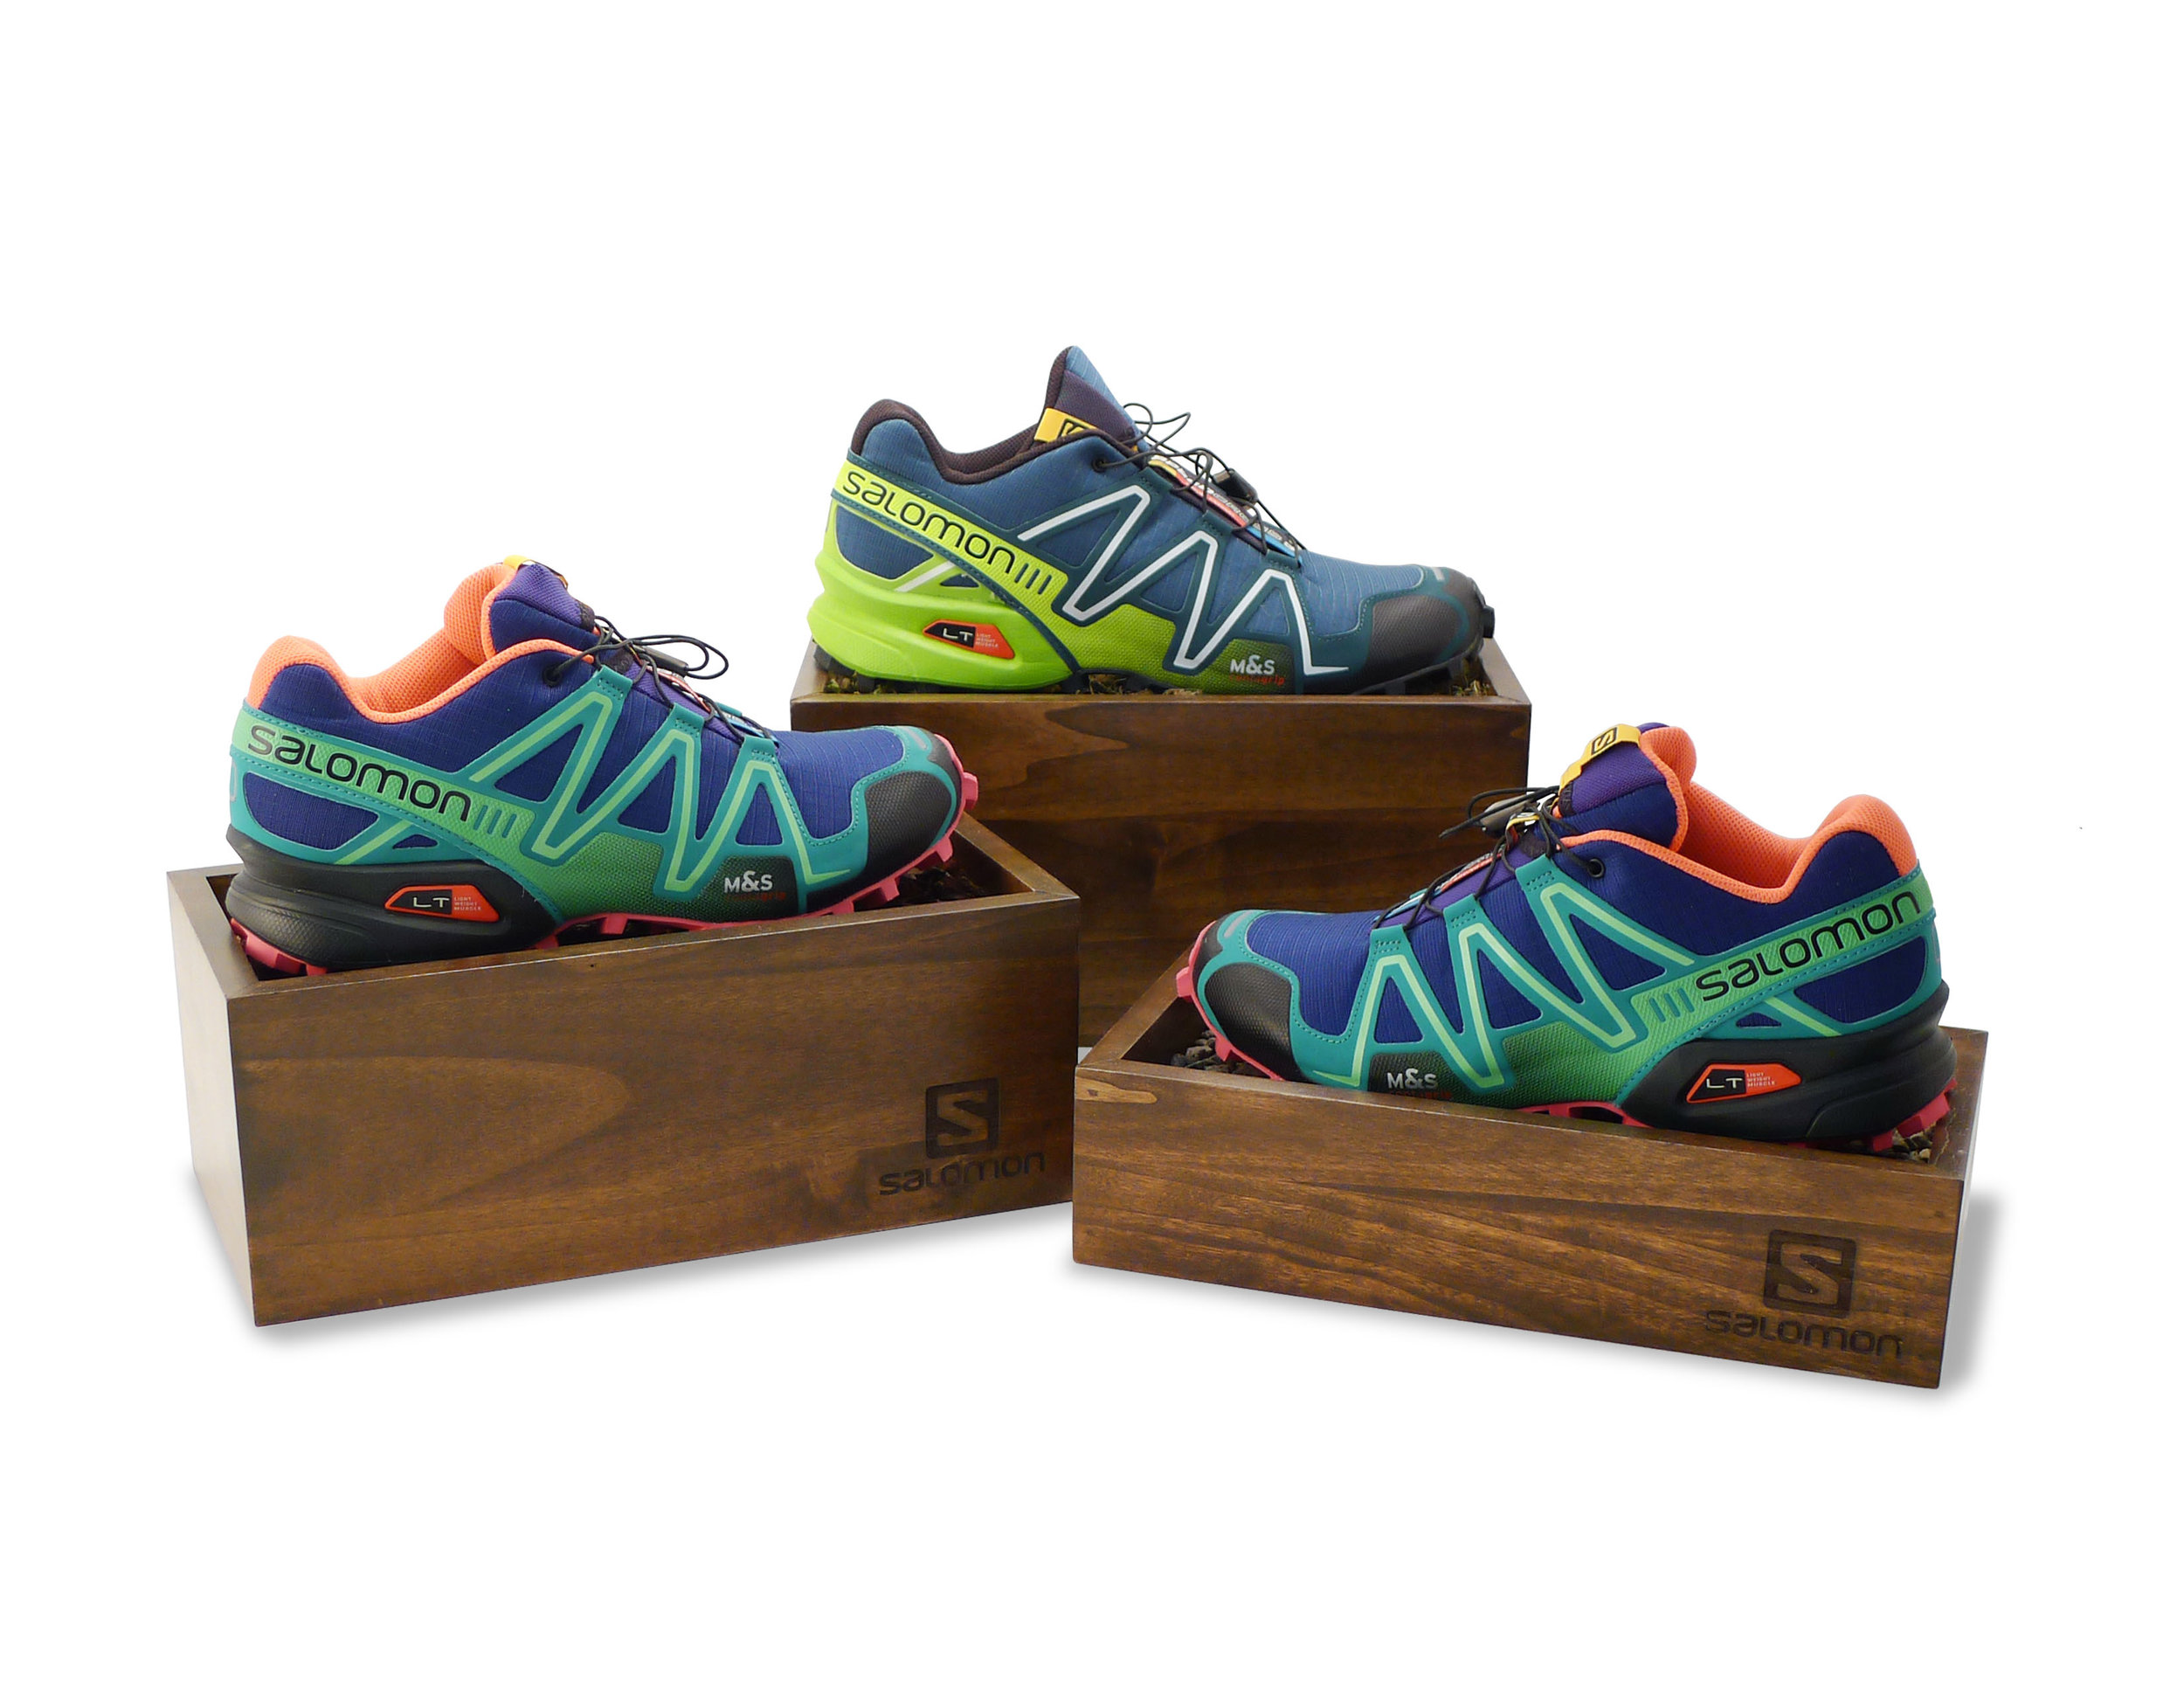  Salomon Trail Shoe Risers, featuring natural elements:&nbsp;rocks, moss, simulated wood chips&nbsp;   